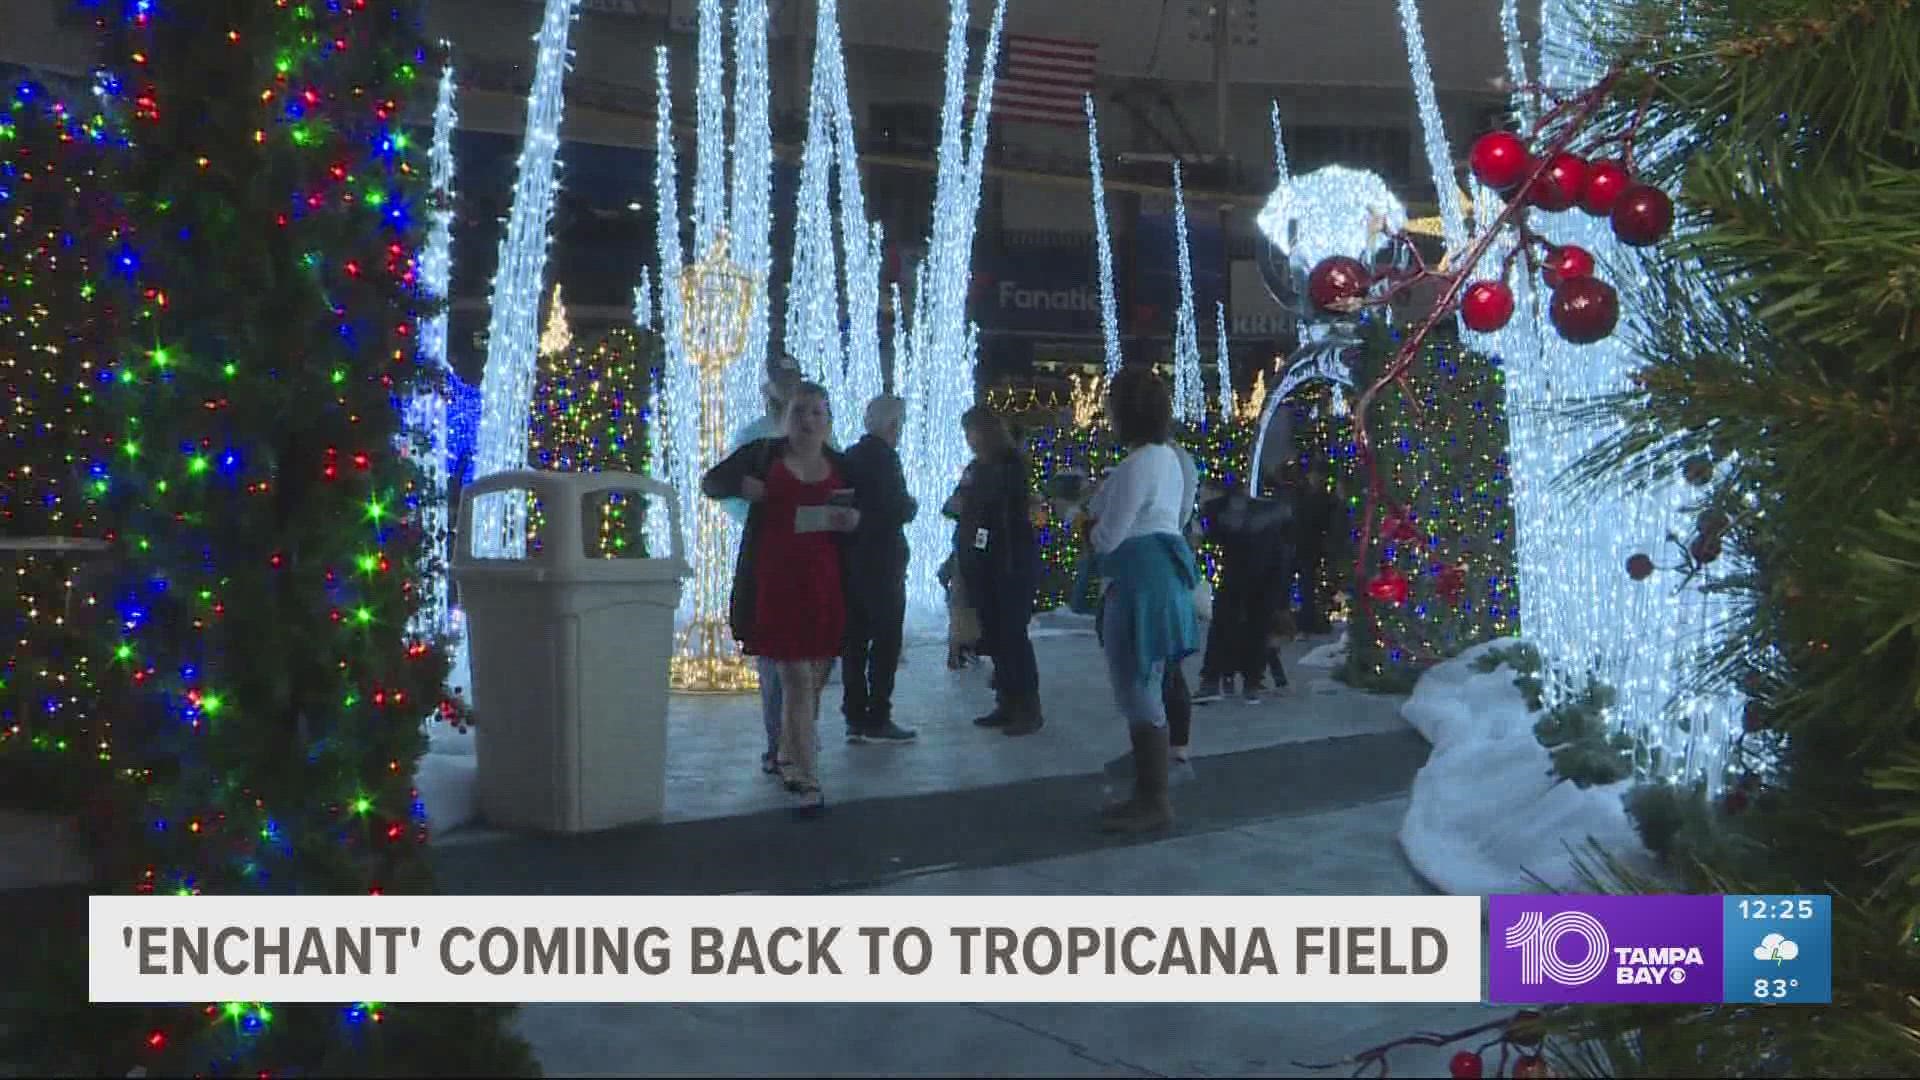 This winter, Enchant will roll out more than four million dazzling lights and a 100-foot-tall holiday tree for the third year in a row in St. Petersburg.